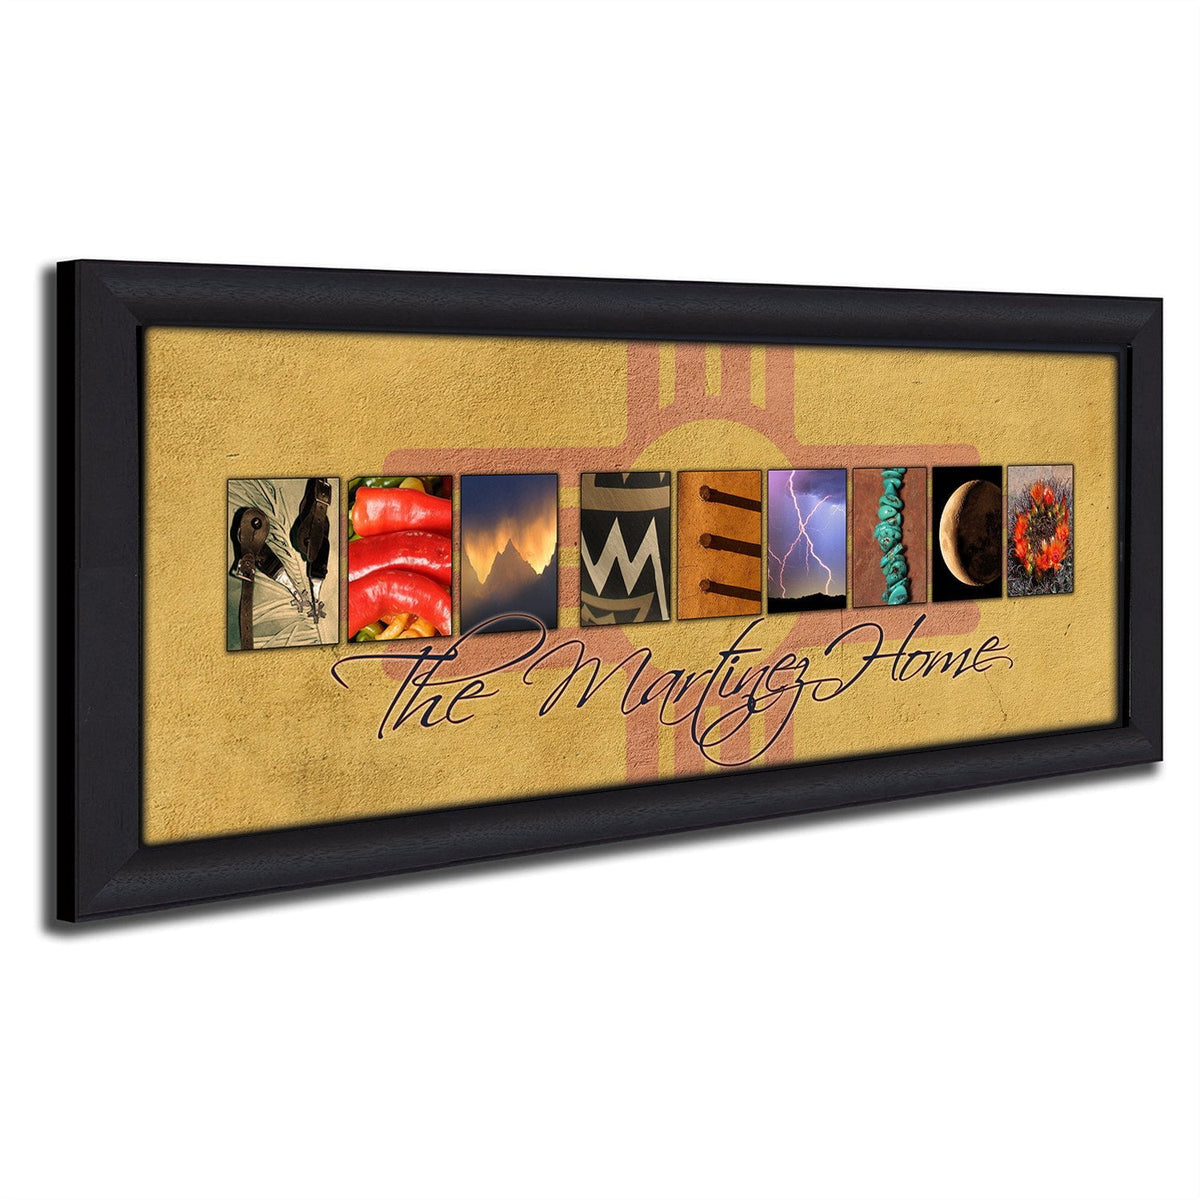 Framed Canvas New Mexico Art Wall Decor from Personal Prints